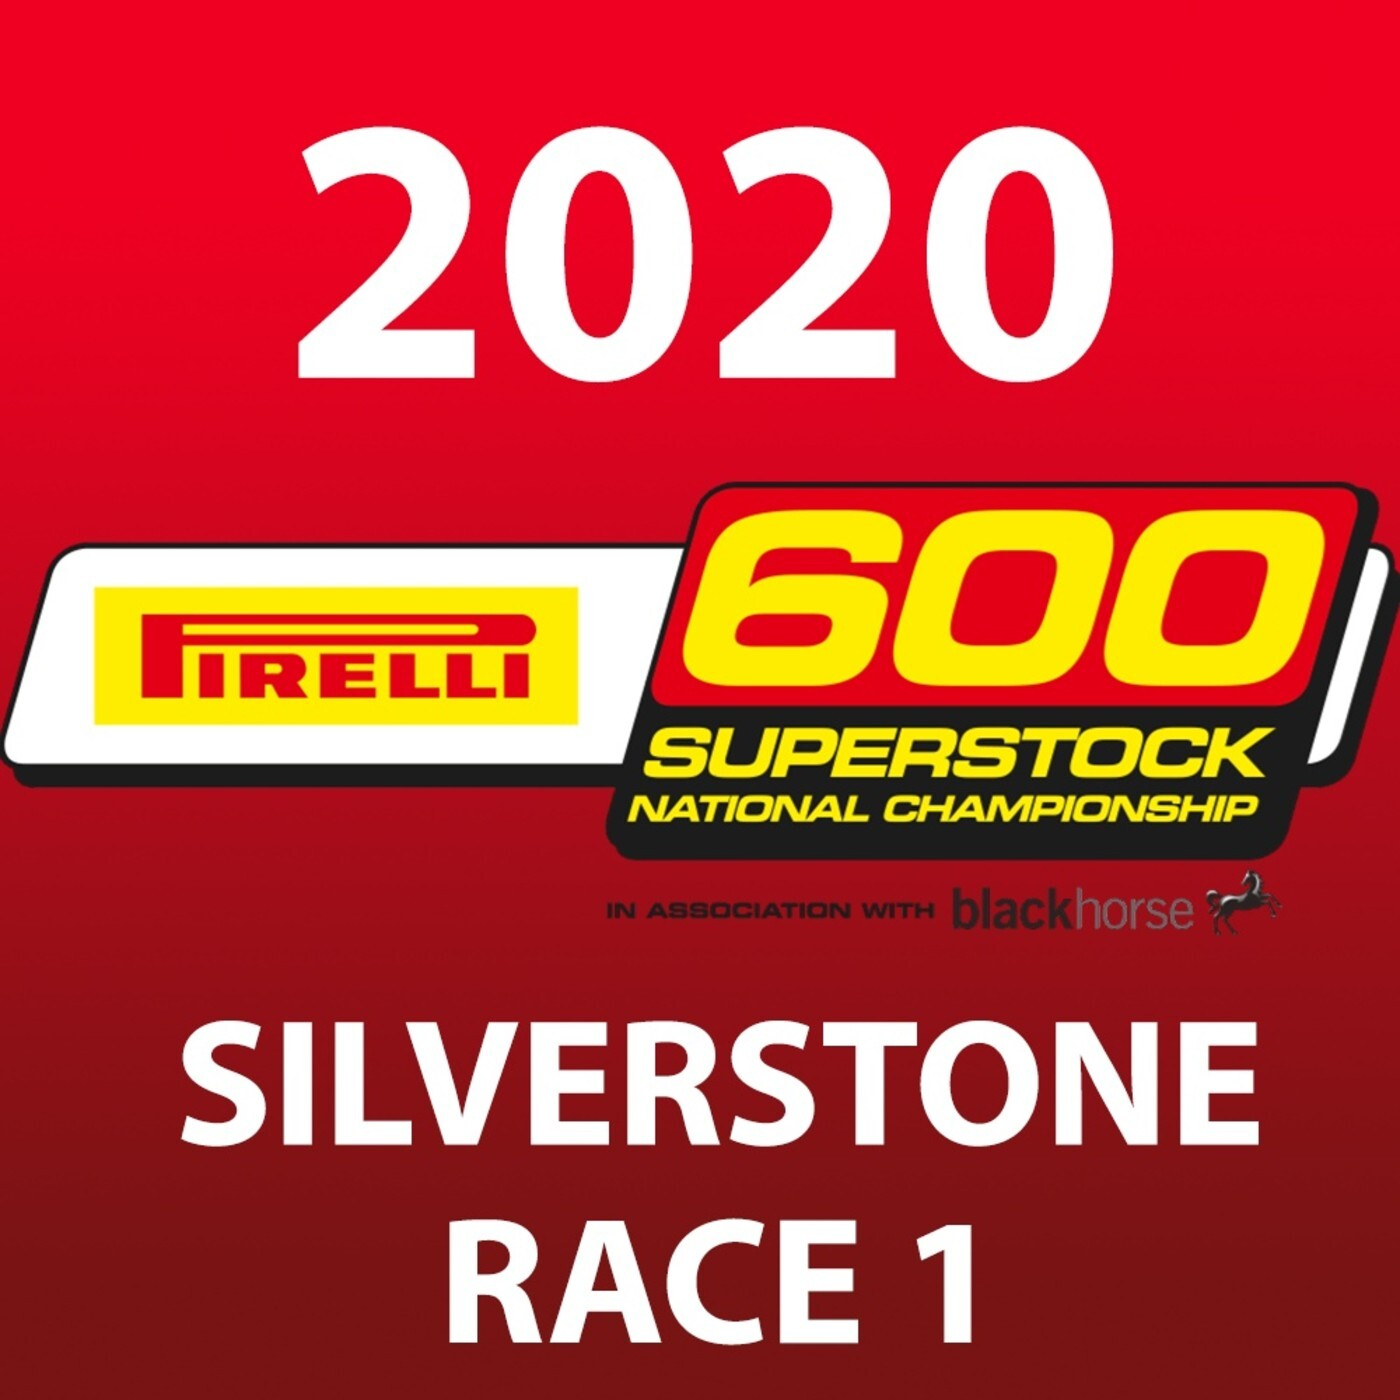 Pirelli National Superstock 600 in association with Black Horse - Silverstone 2020